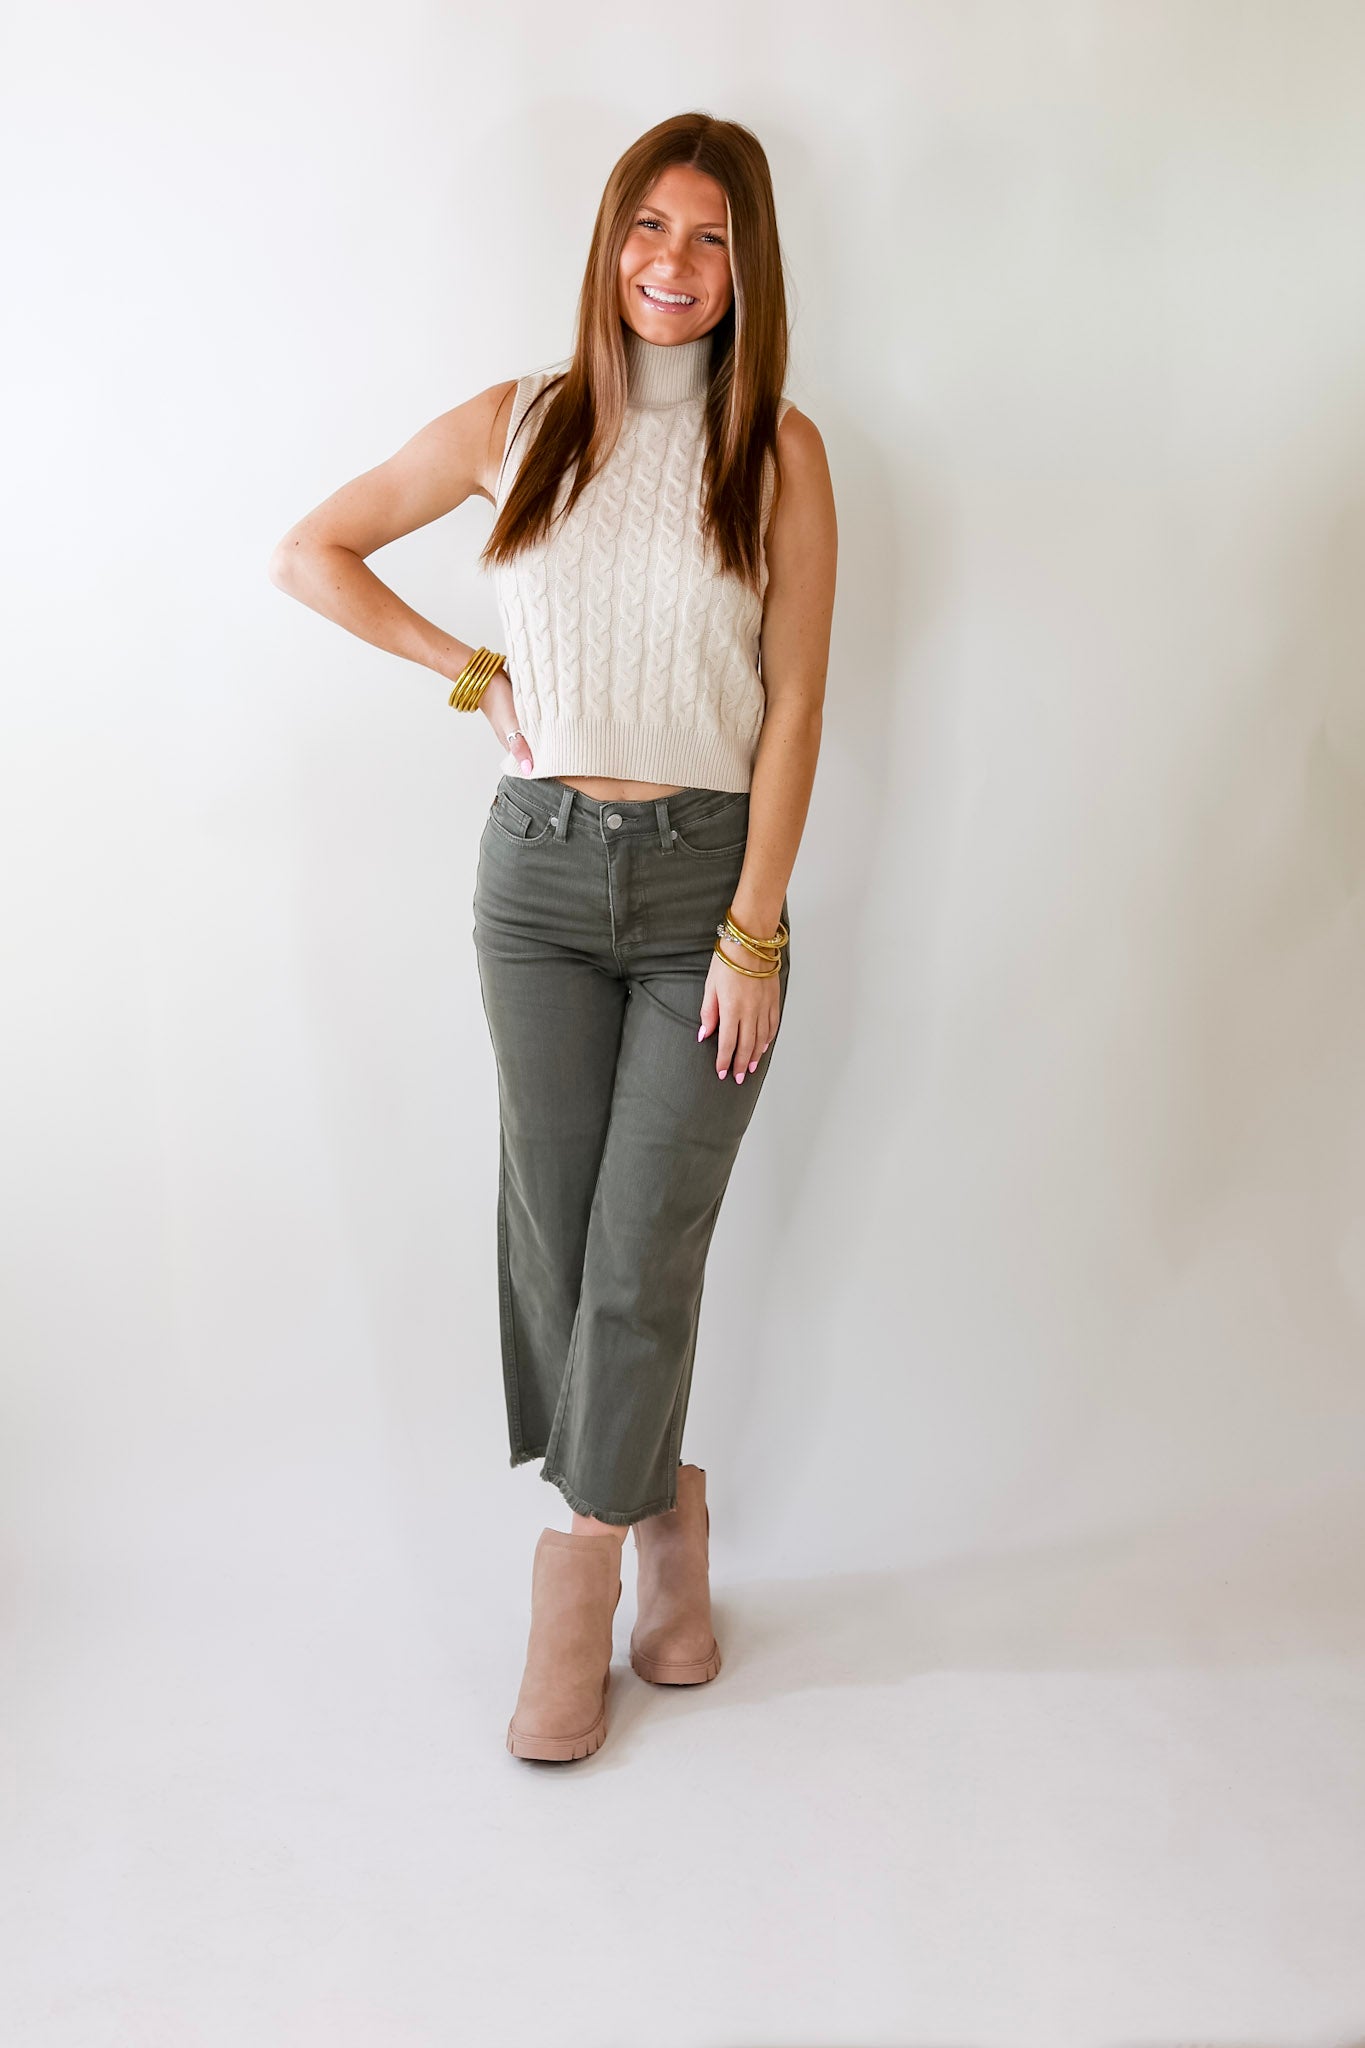 Cider Sips Cropped Sweater Tank Top with High Neck in Ivory - Giddy Up Glamour Boutique